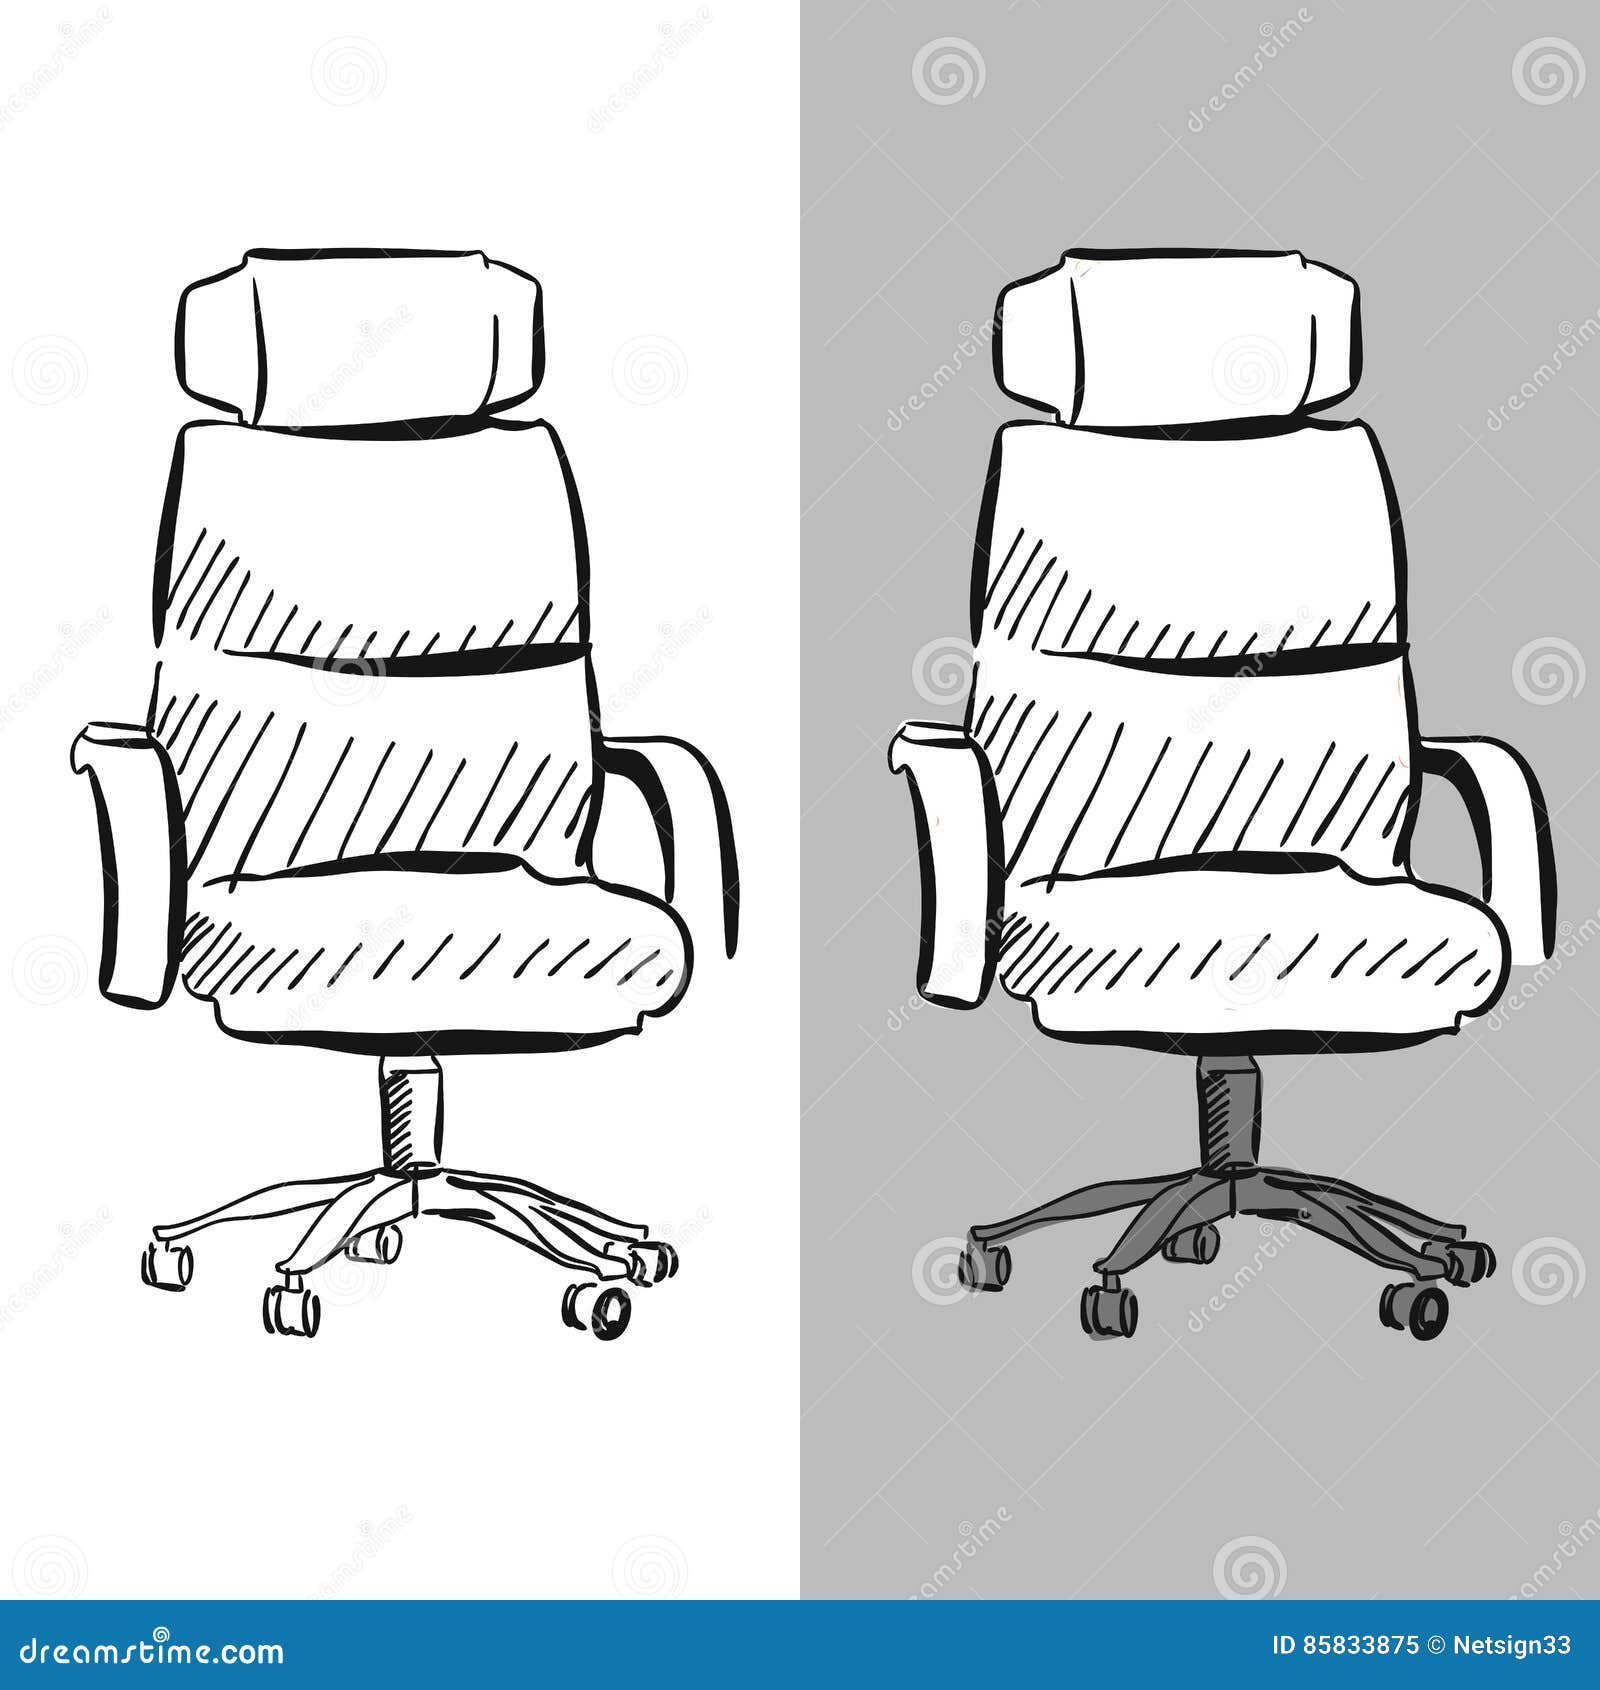 6400 Drawing Of Office Chair Stock Photos Pictures  RoyaltyFree Images   iStock